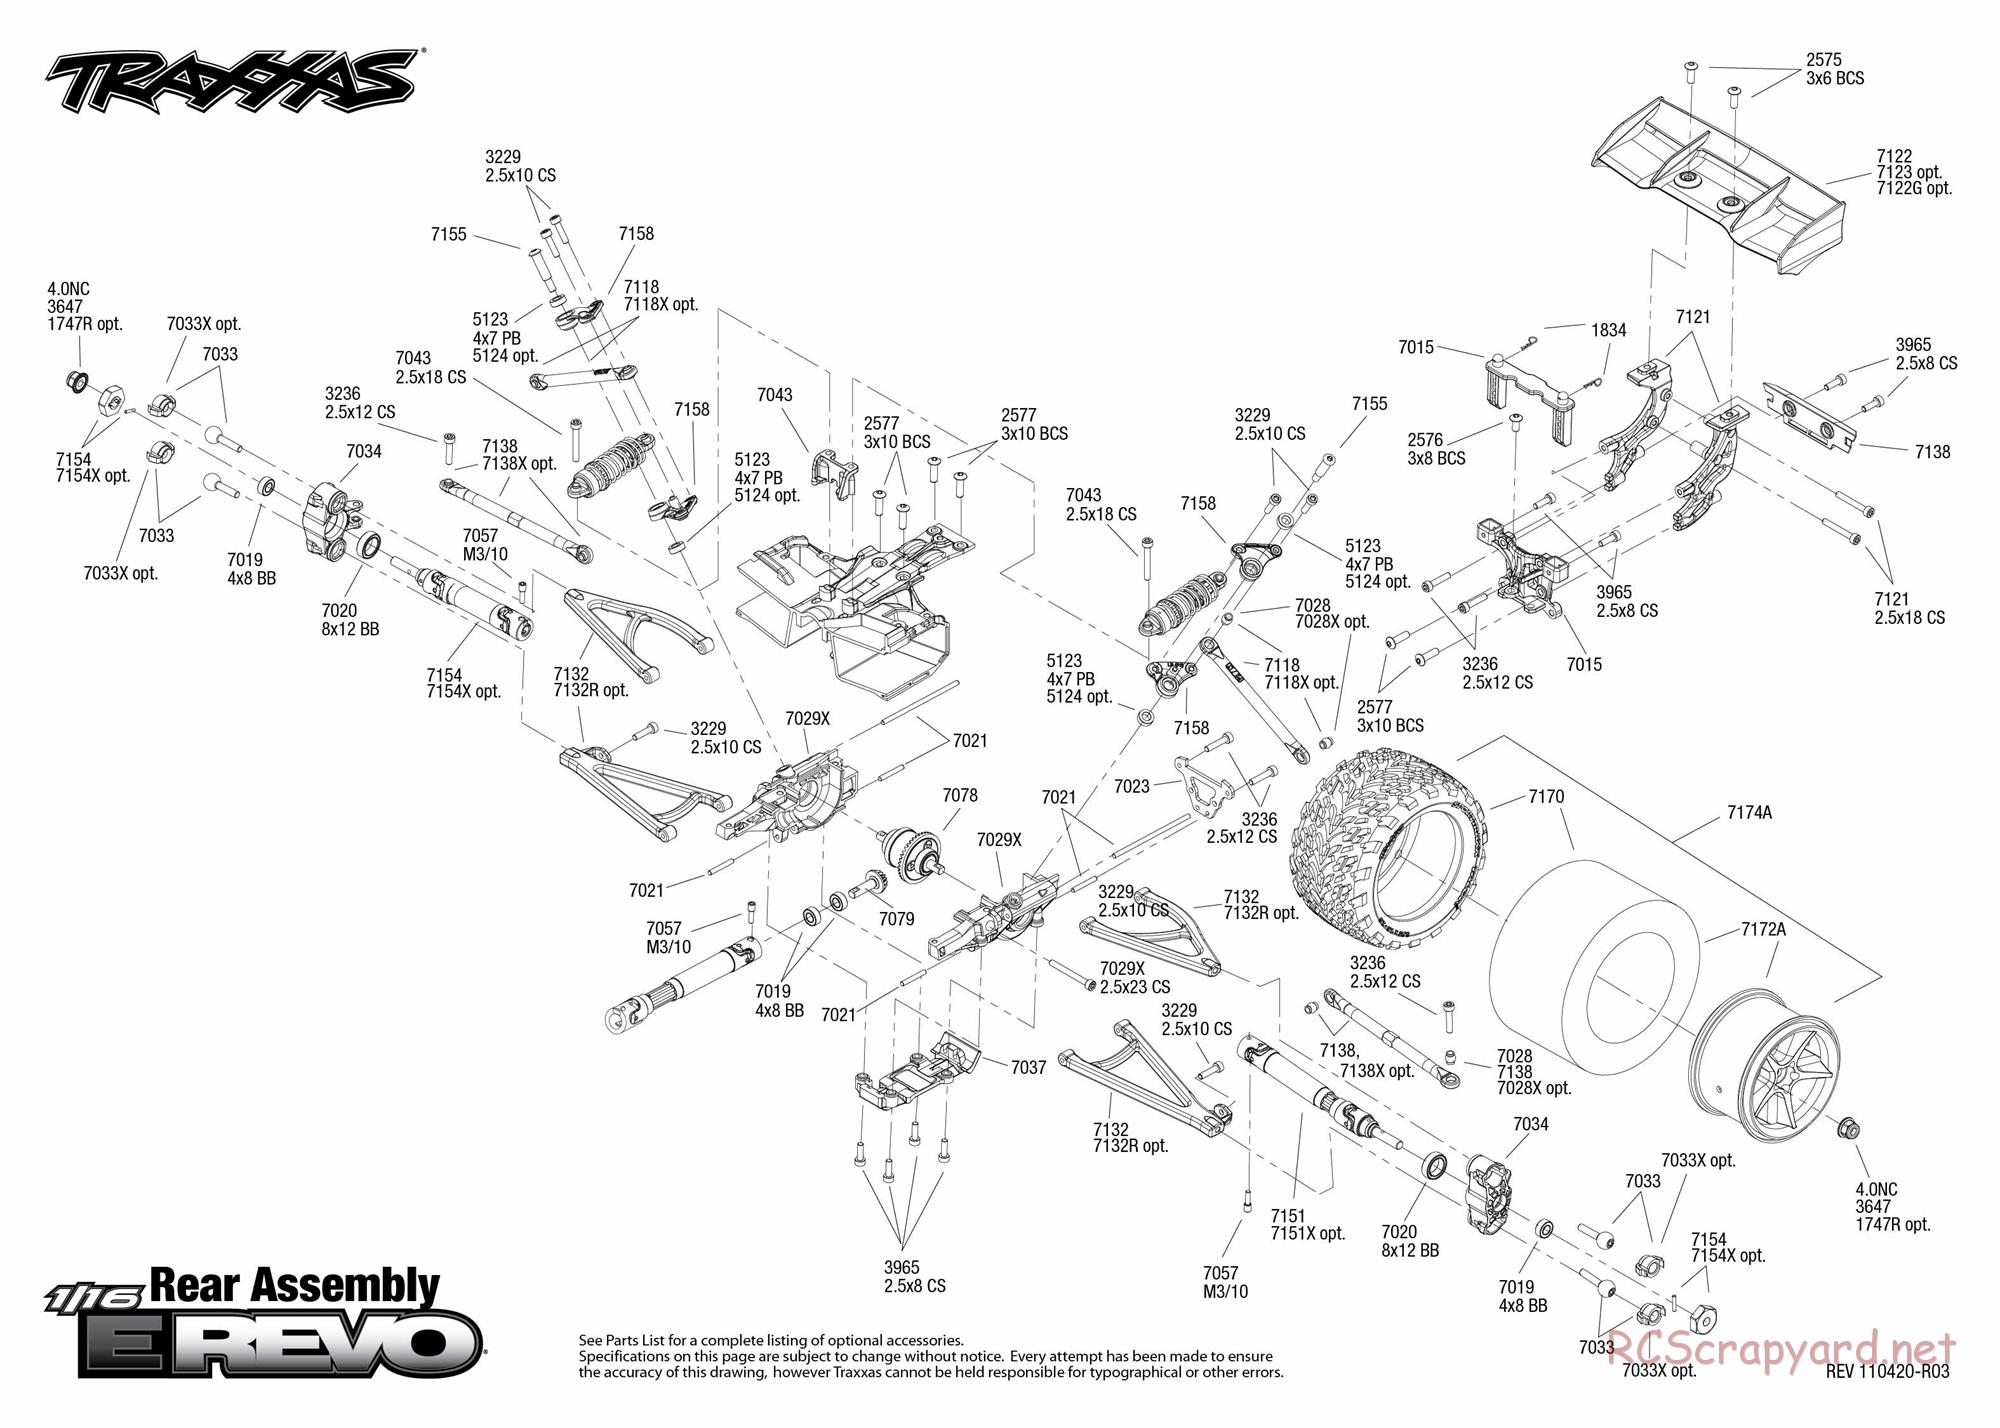 Traxxas - 1/16 E-Revo Brushed (2010) - Exploded Views - Page 3